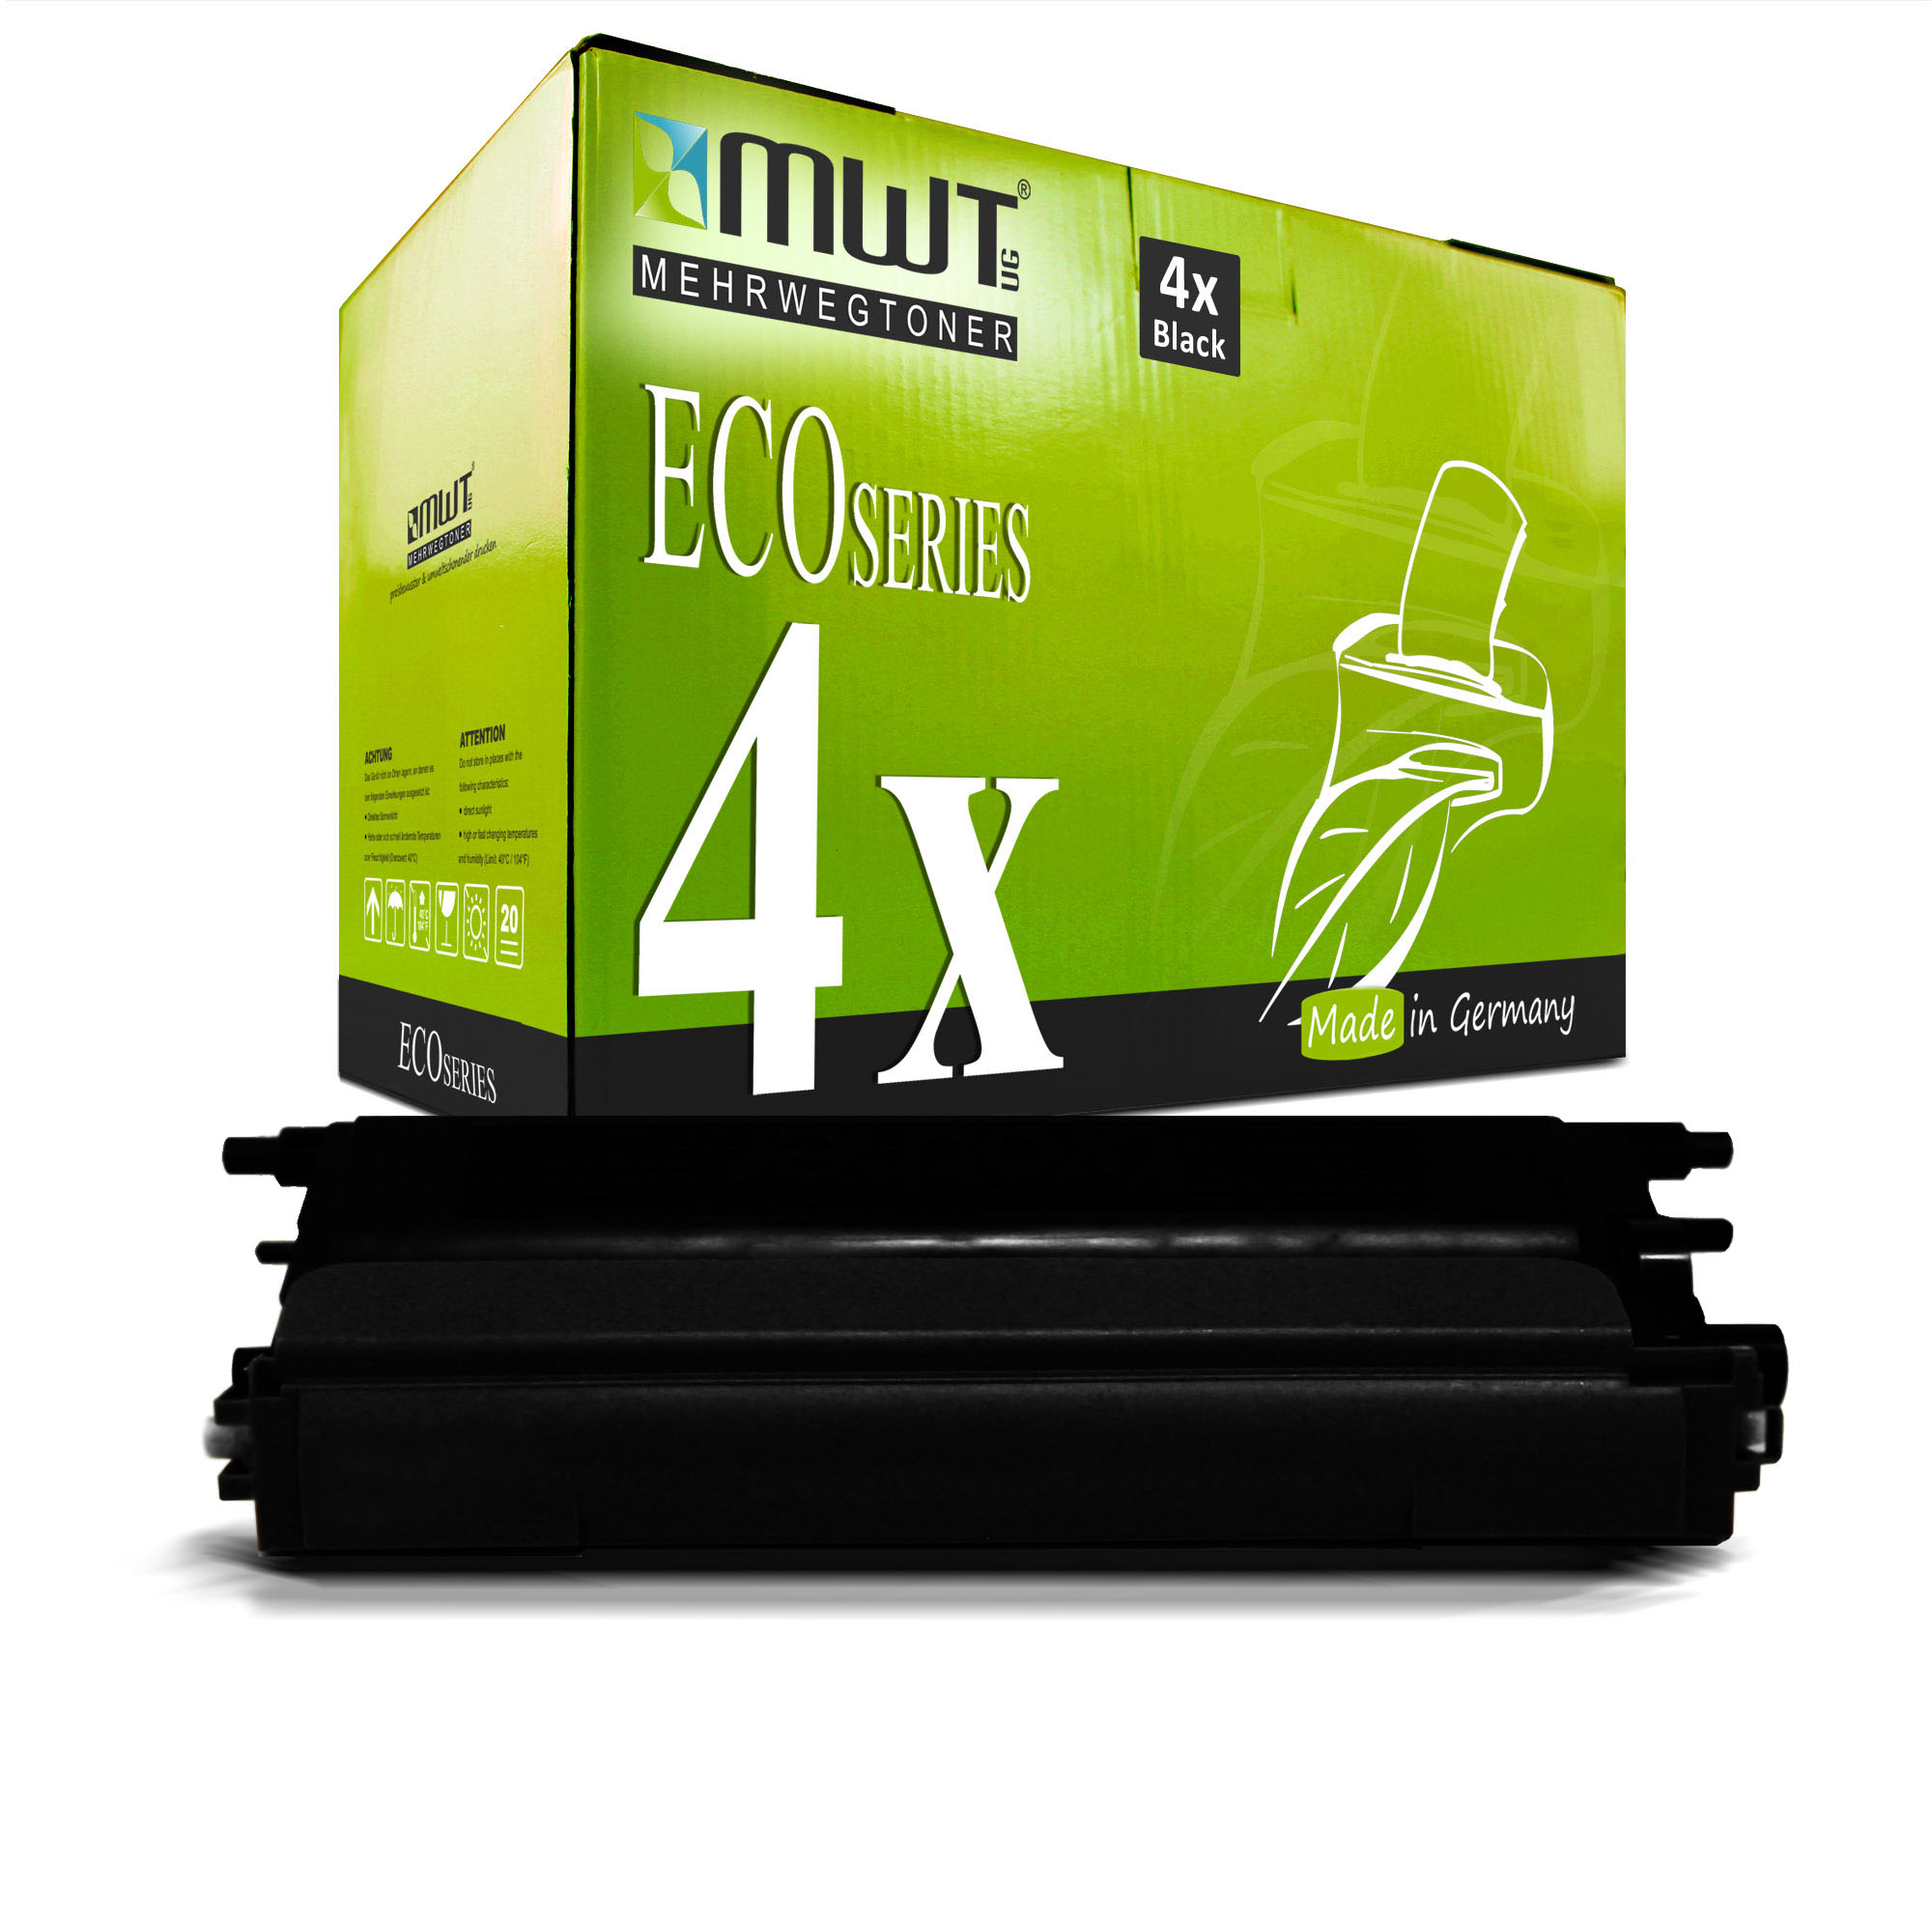 MWT TONER CIANO COMPATIBILE PER BROTHER hl-4070 hl-4050 hl-4040 dcp-9042 dcp-9045 